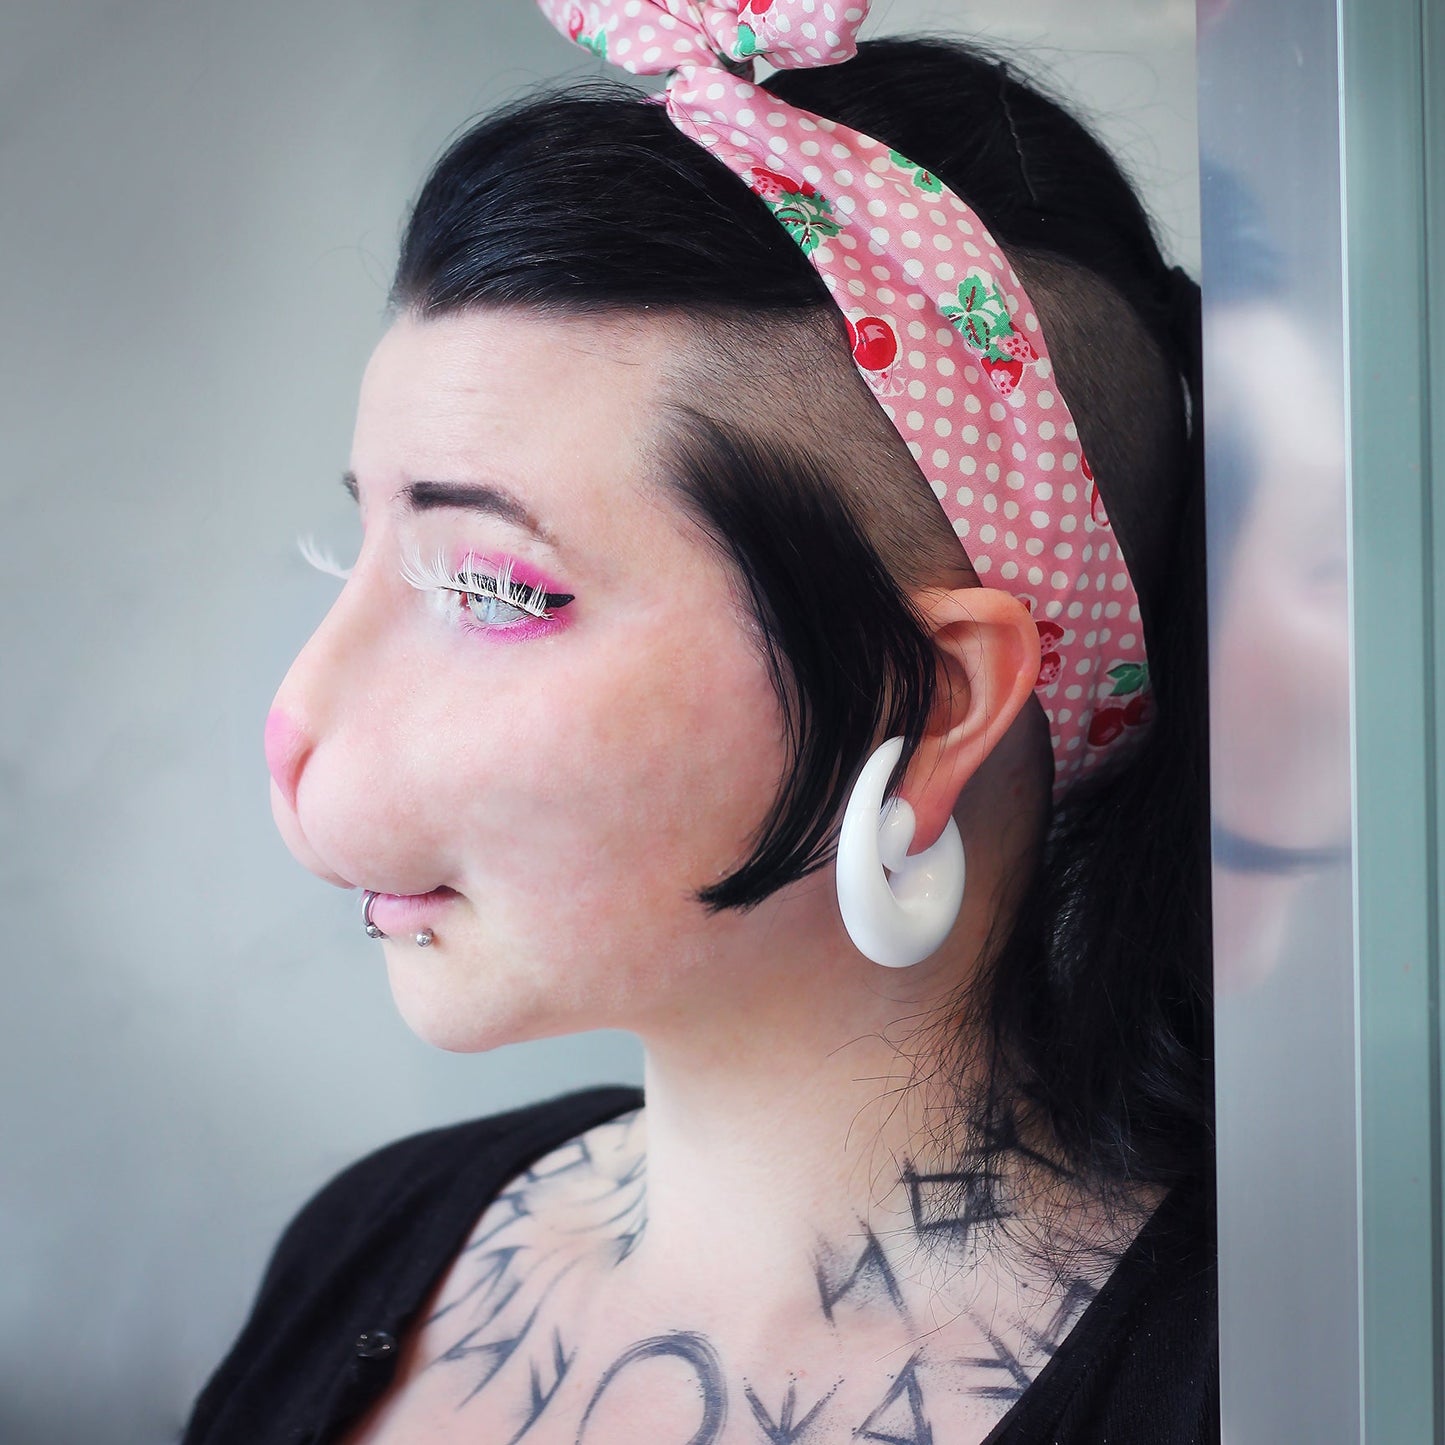 Woman with black hair wearing a bunny nose prosthetic in vanilla shade